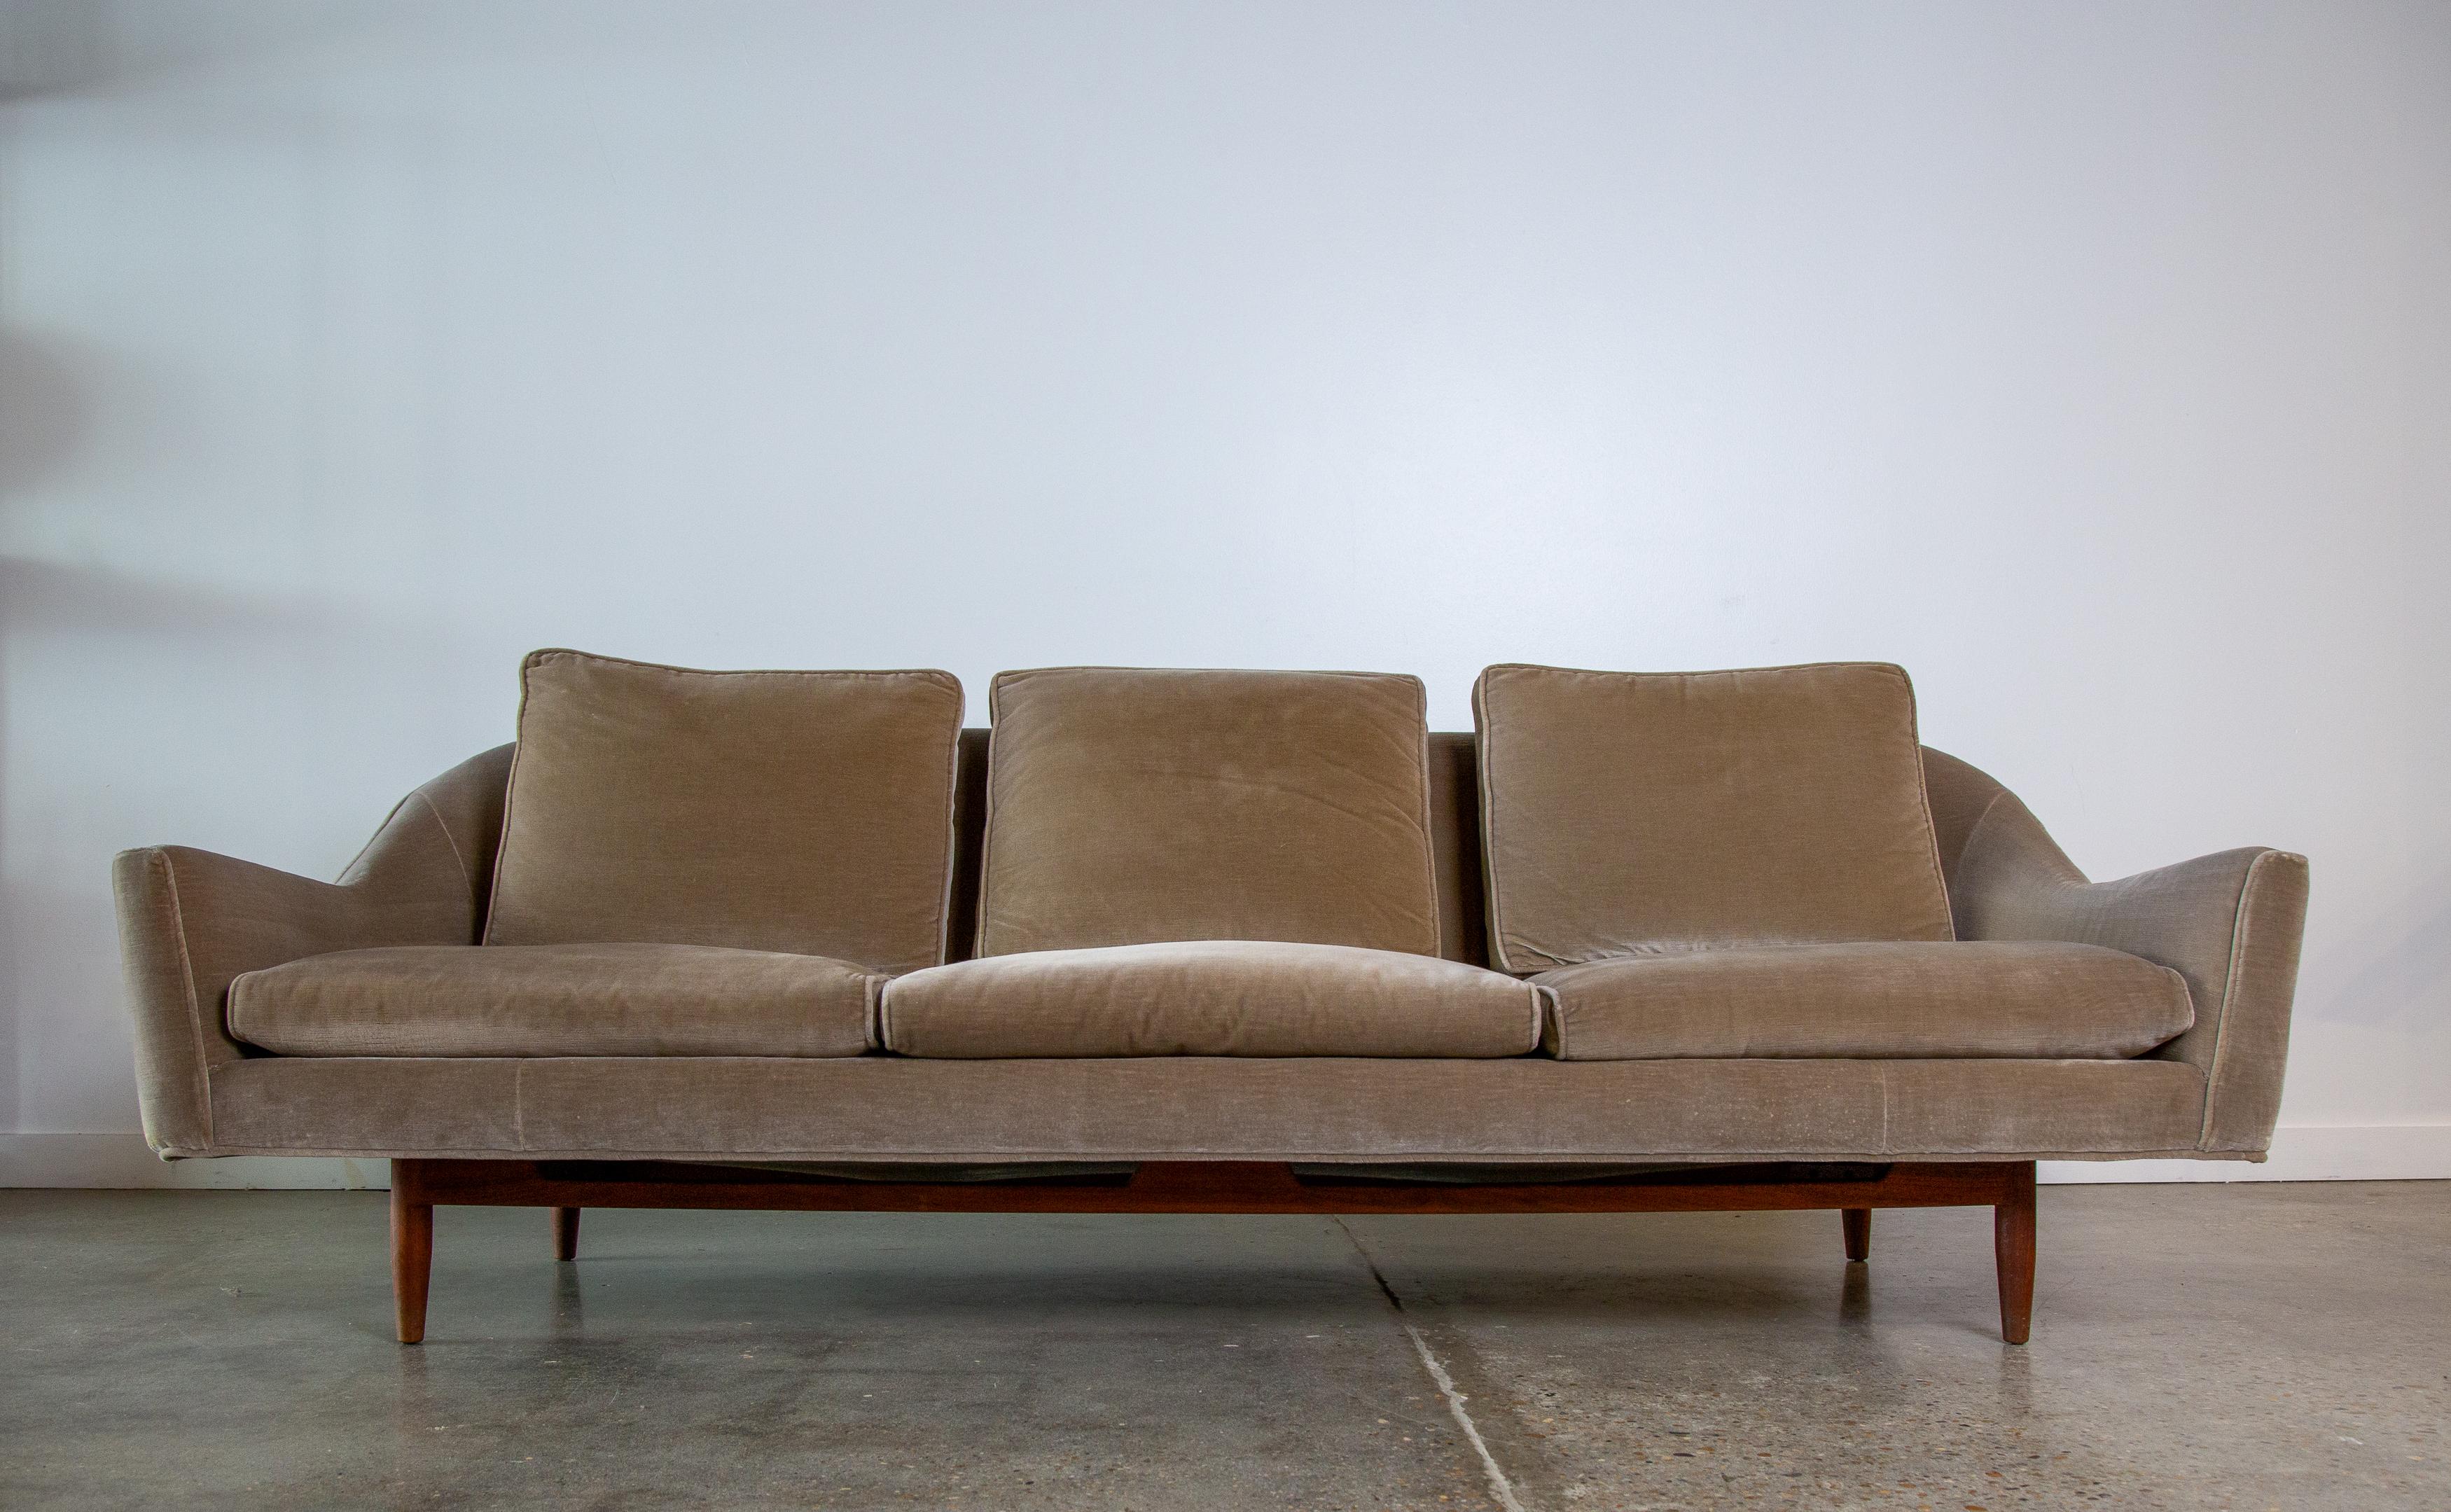 Uncommon Jens Risom Model 2516 sofa with a curvaceous back and sculptural walnut base.  The sides of the base with subtle bow tie shape, cutouts in the front of the frame lend to the allusion of floating.  The front with a generous cantilever off